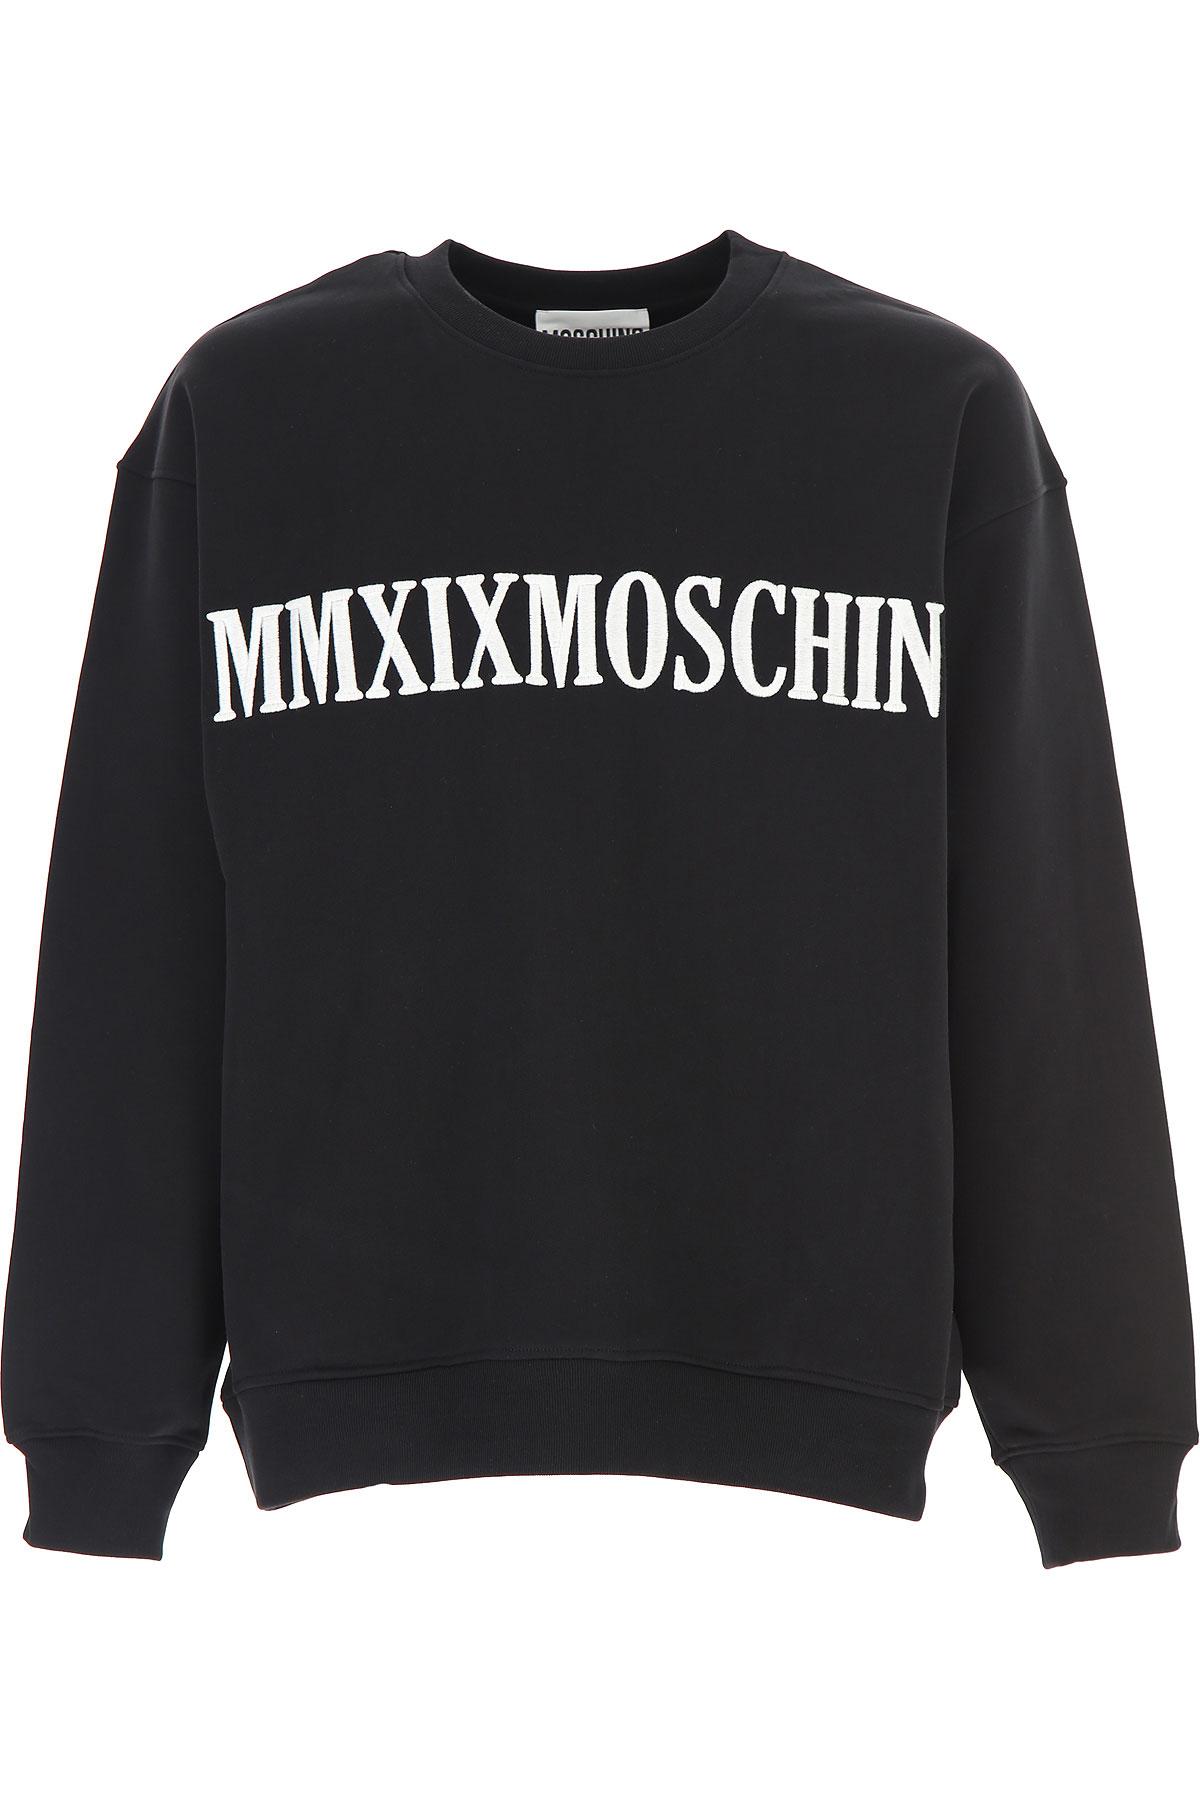 Moschino Wool Sweater in Black for Men - Save 27% - Lyst